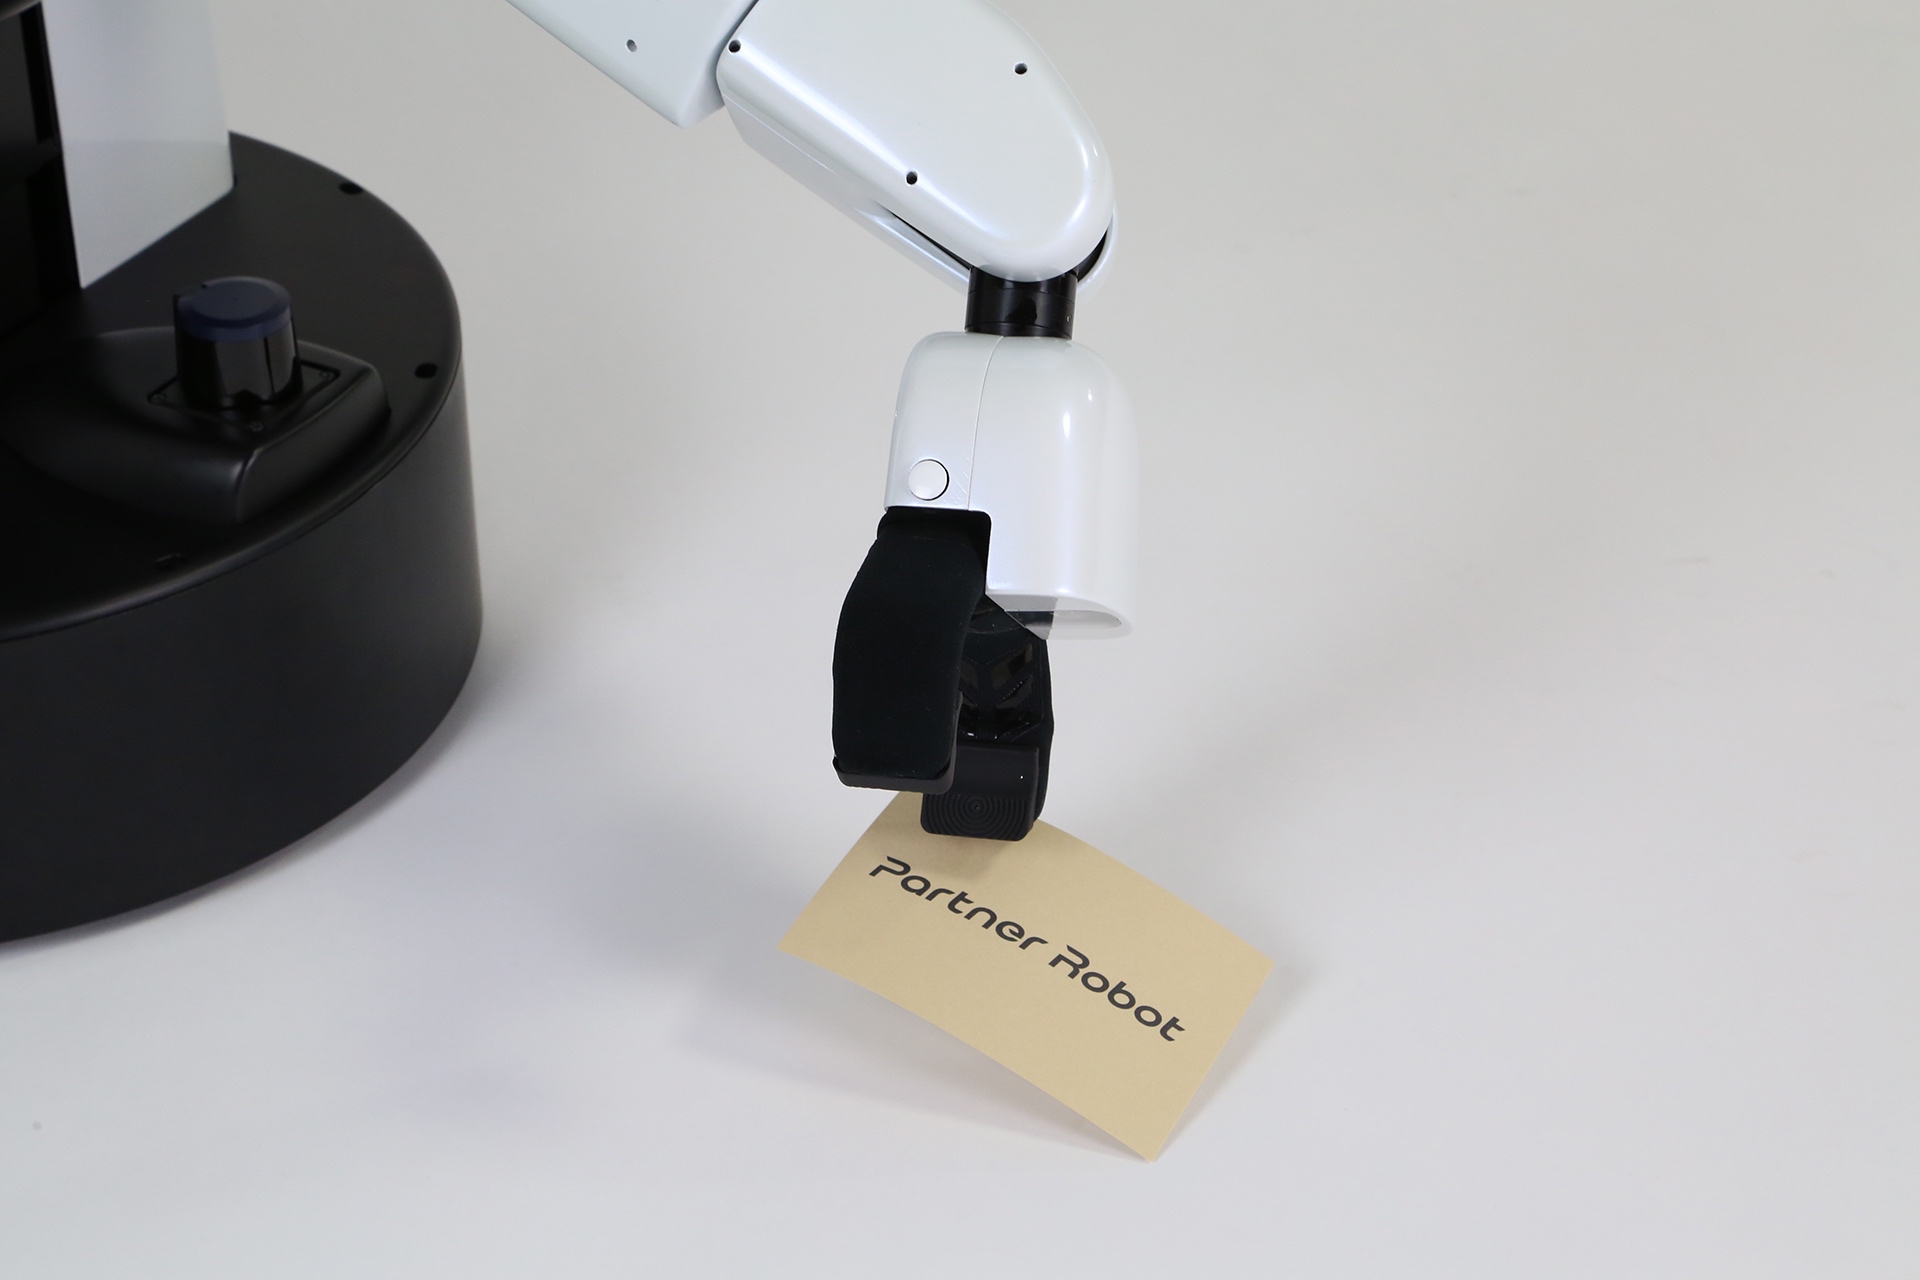 Toyota's "HSR" personal care robot uses a suction cup to pickup a business card with the text "Partner Robots" 